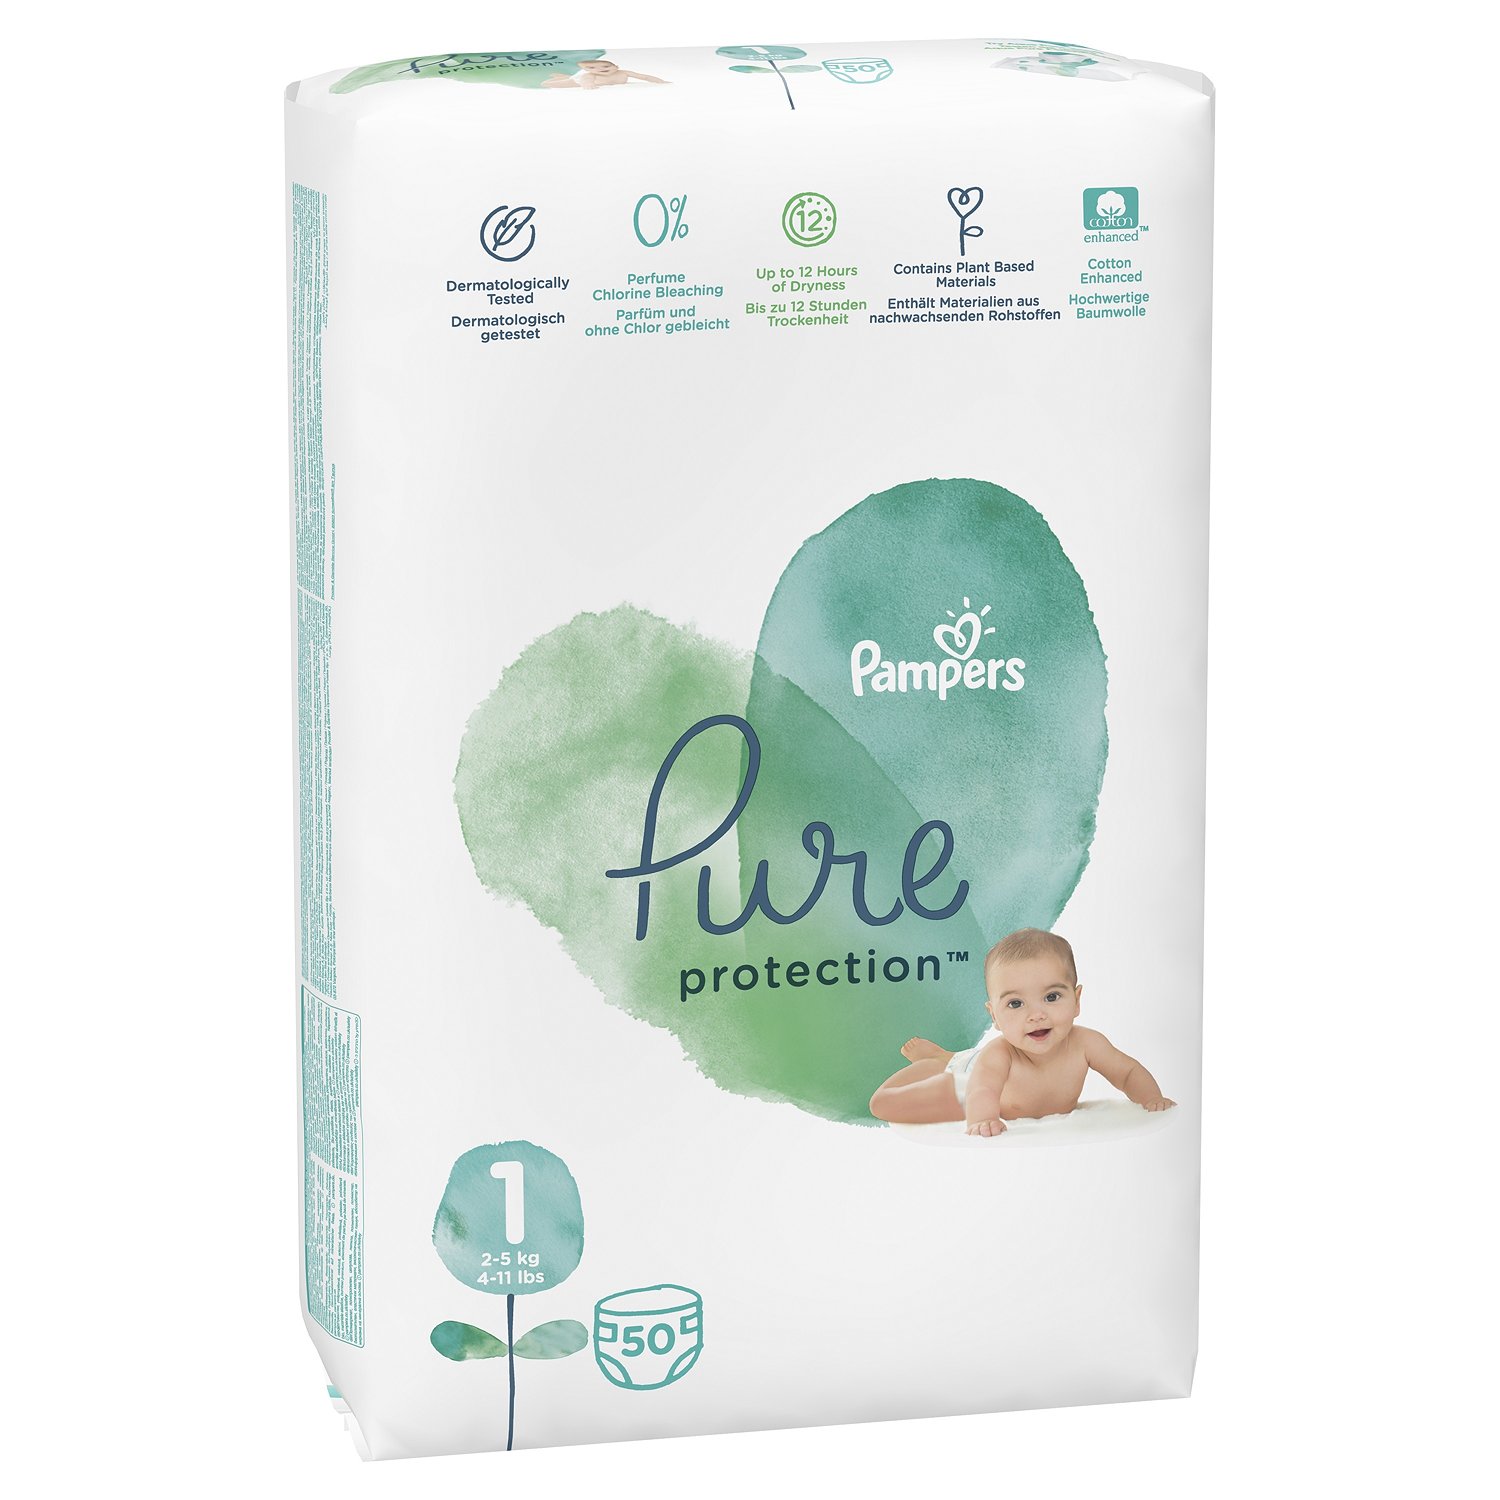 Pampers pure 1